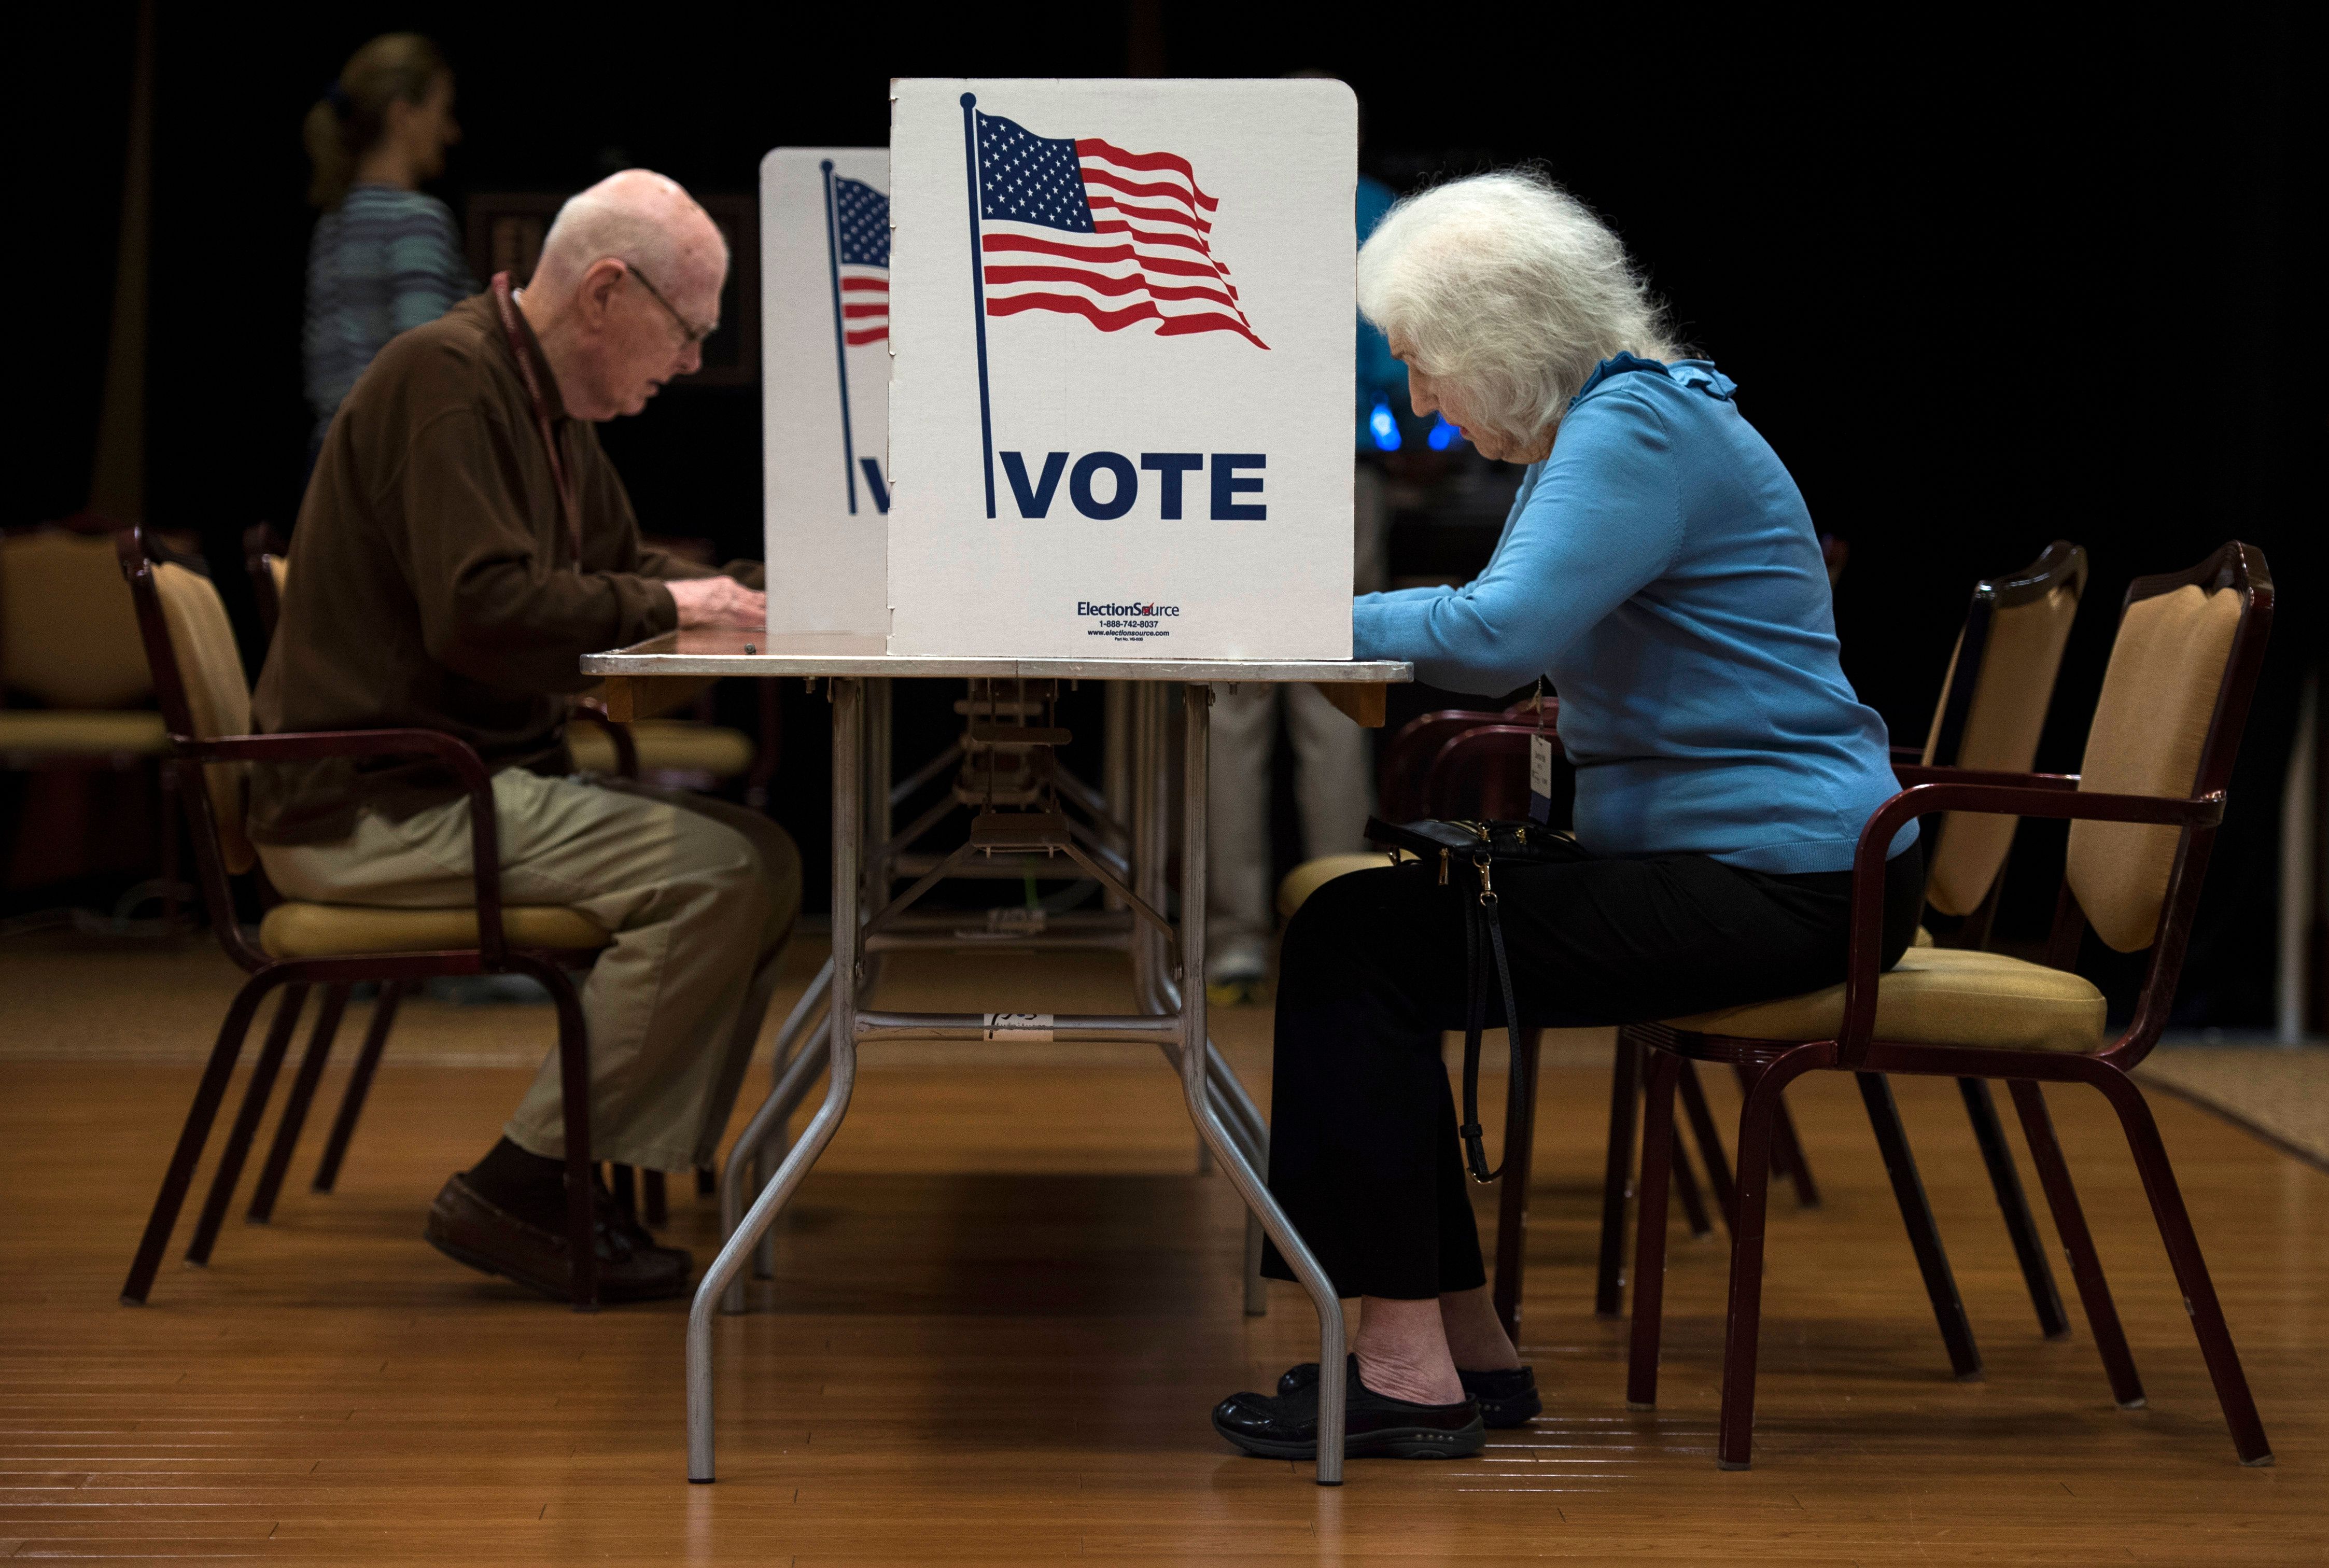 People vote at the Greenspring Retirement center during the mid-term election day in Fairfax, Virginia on November 6, 2018. (Photo by ANDREW CABALLERO-REYNOLDS / AFP) (Photo credit should read ANDREW CABALLERO-REYNOLDS/AFP via Getty Images)